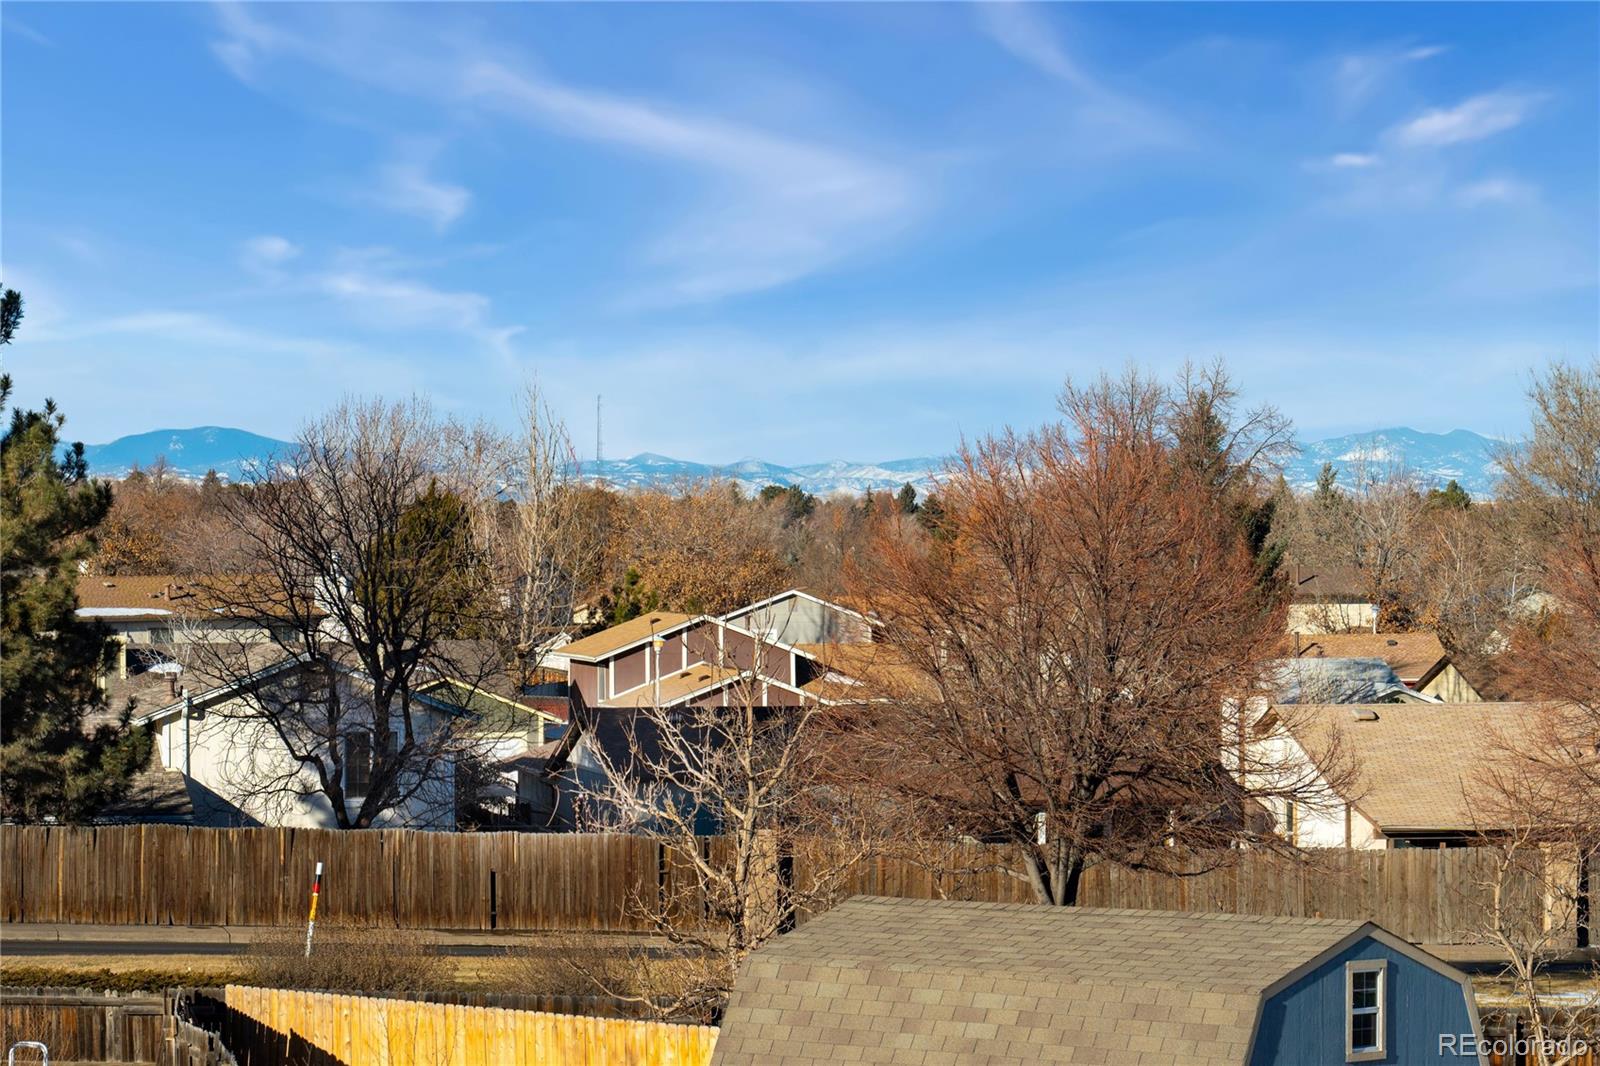 Report Image for 3595 S Pitkin Circle,Aurora, Colorado